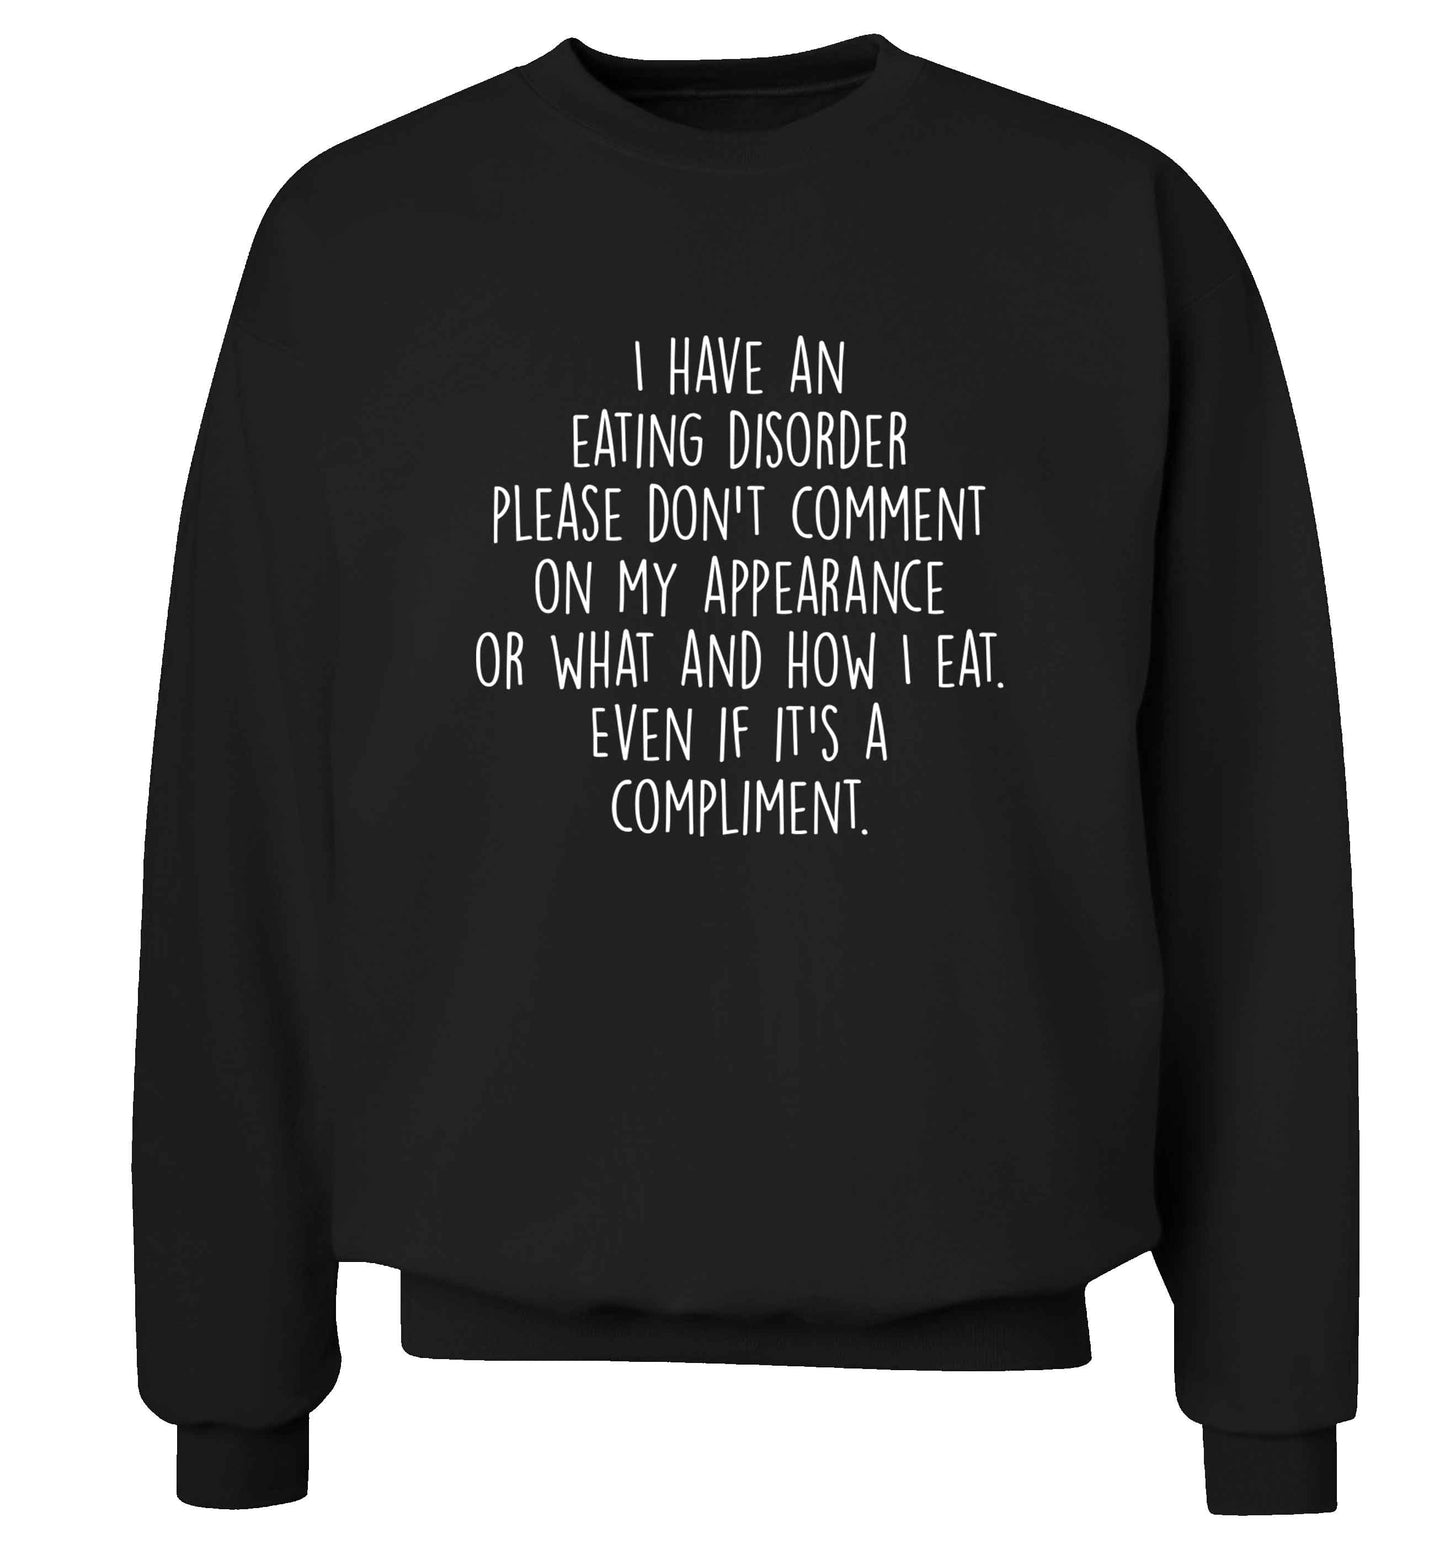 I have an eating disorder please don't comment on my appearance or what and how I eat. Even if it's a compliment adult's unisex black sweater 2XL